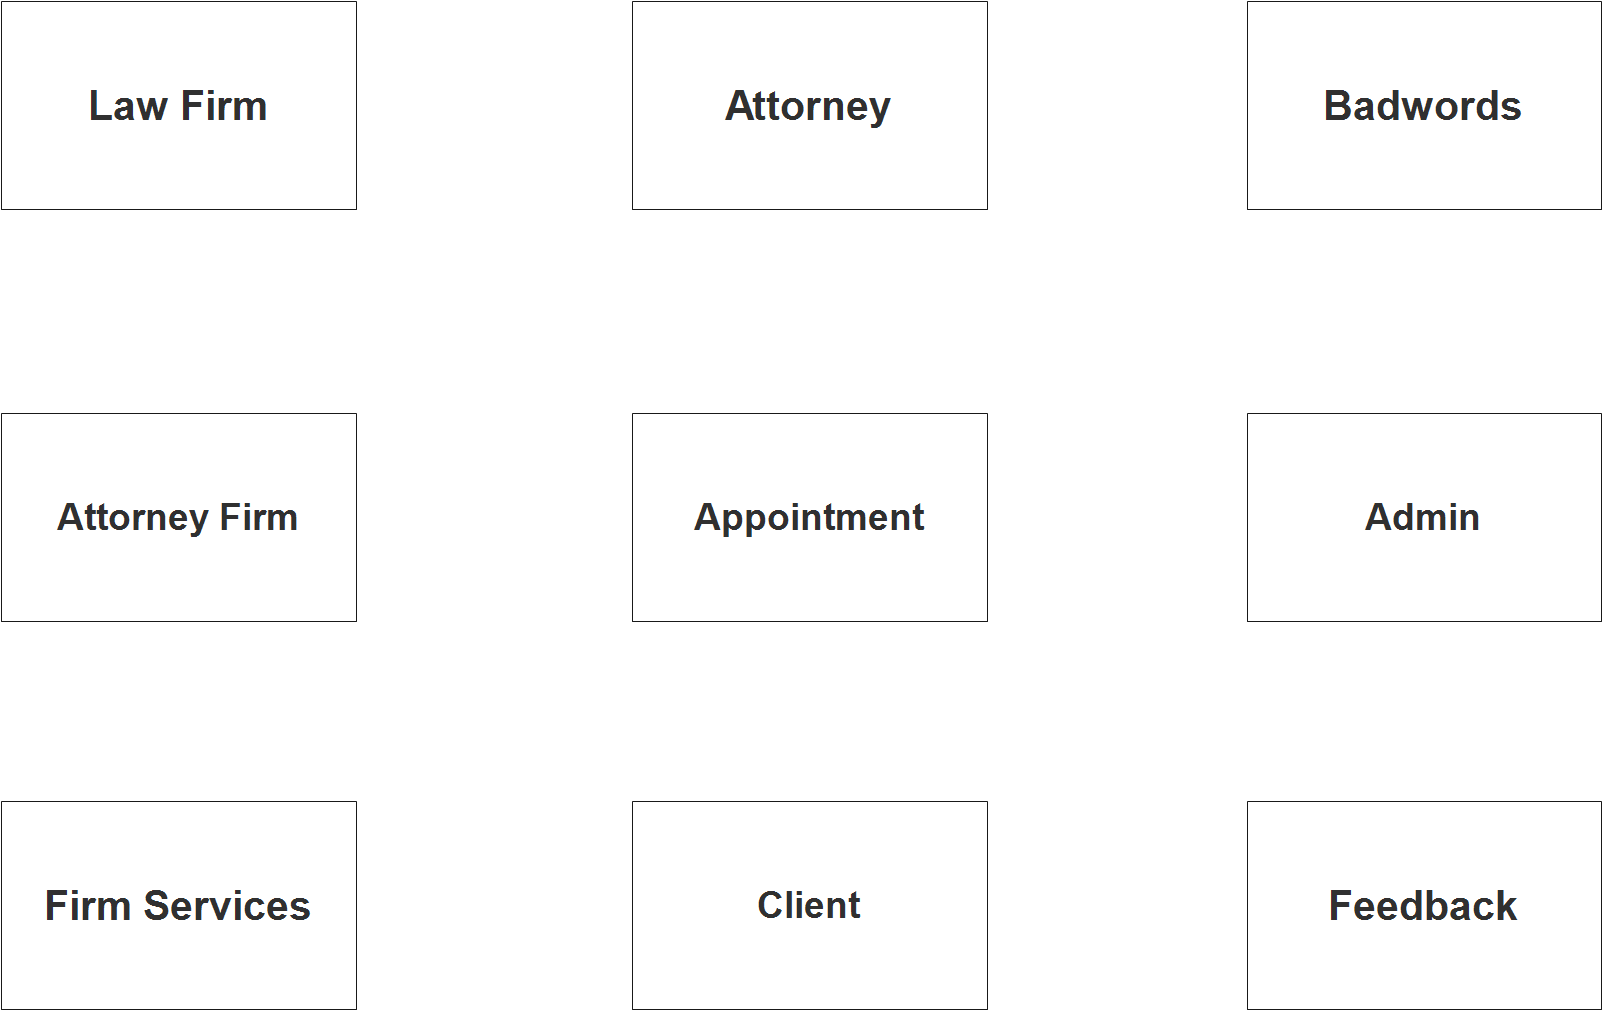 Law Office System ER Diagram - Step 1 Identify Entities